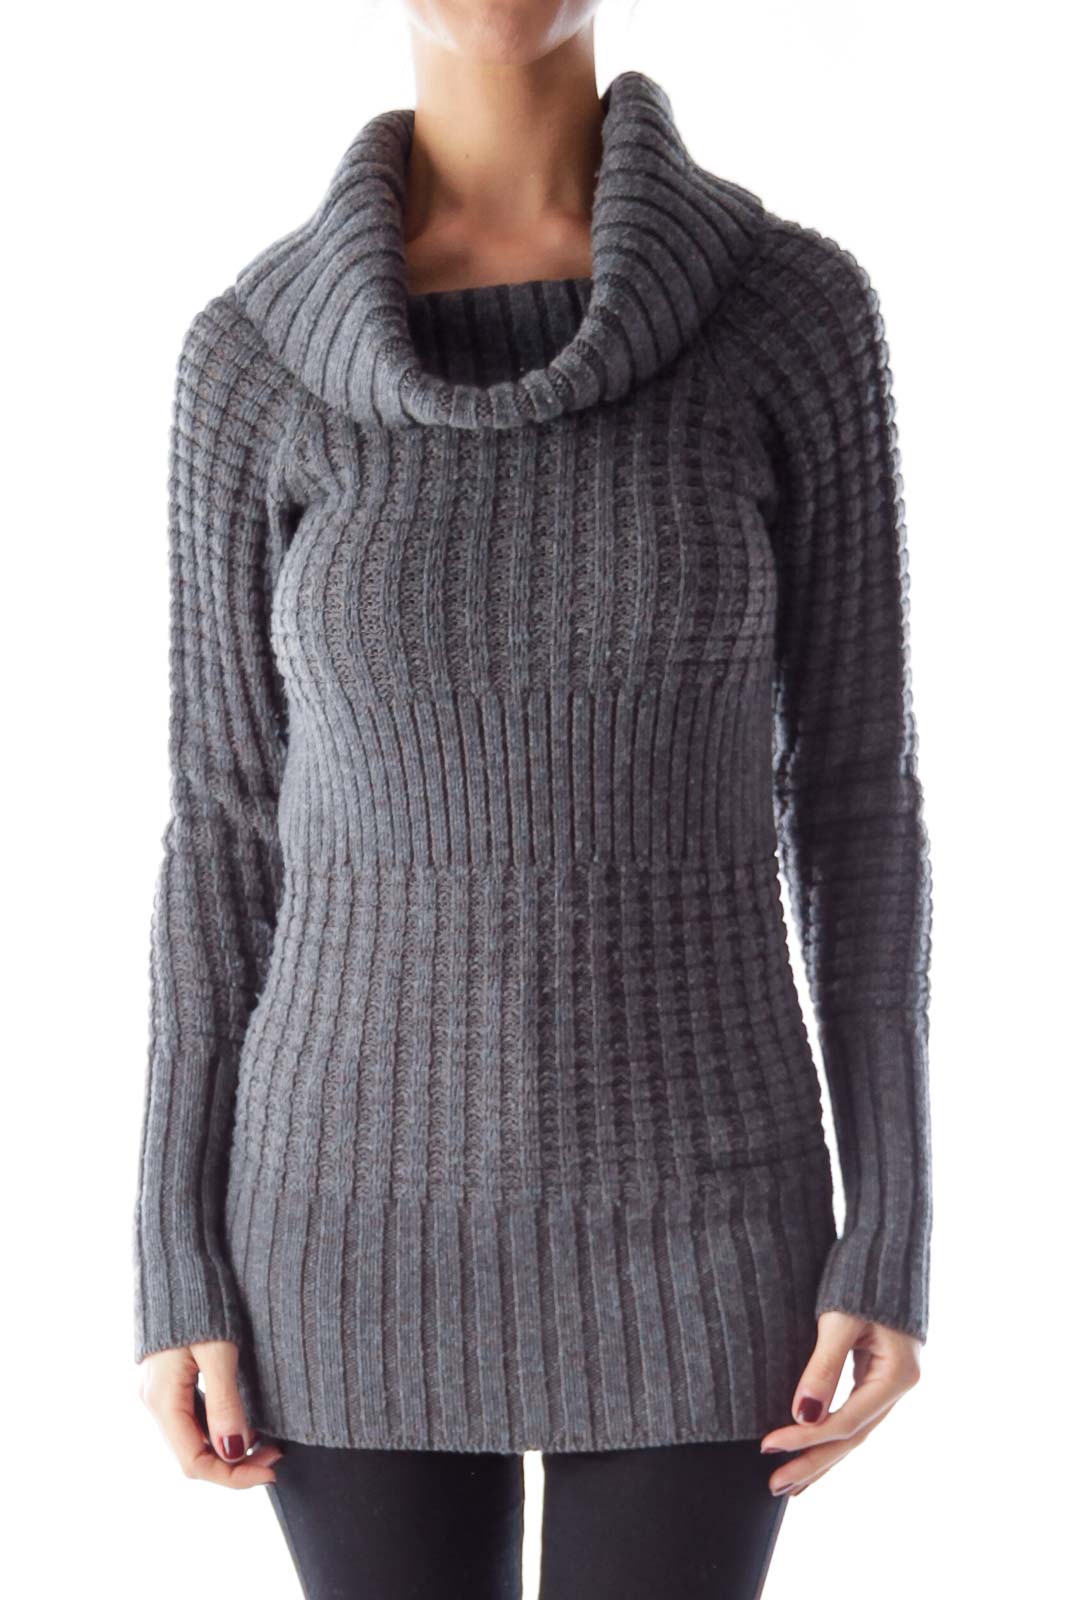 Gray Knit Turtleneck Sweater Front